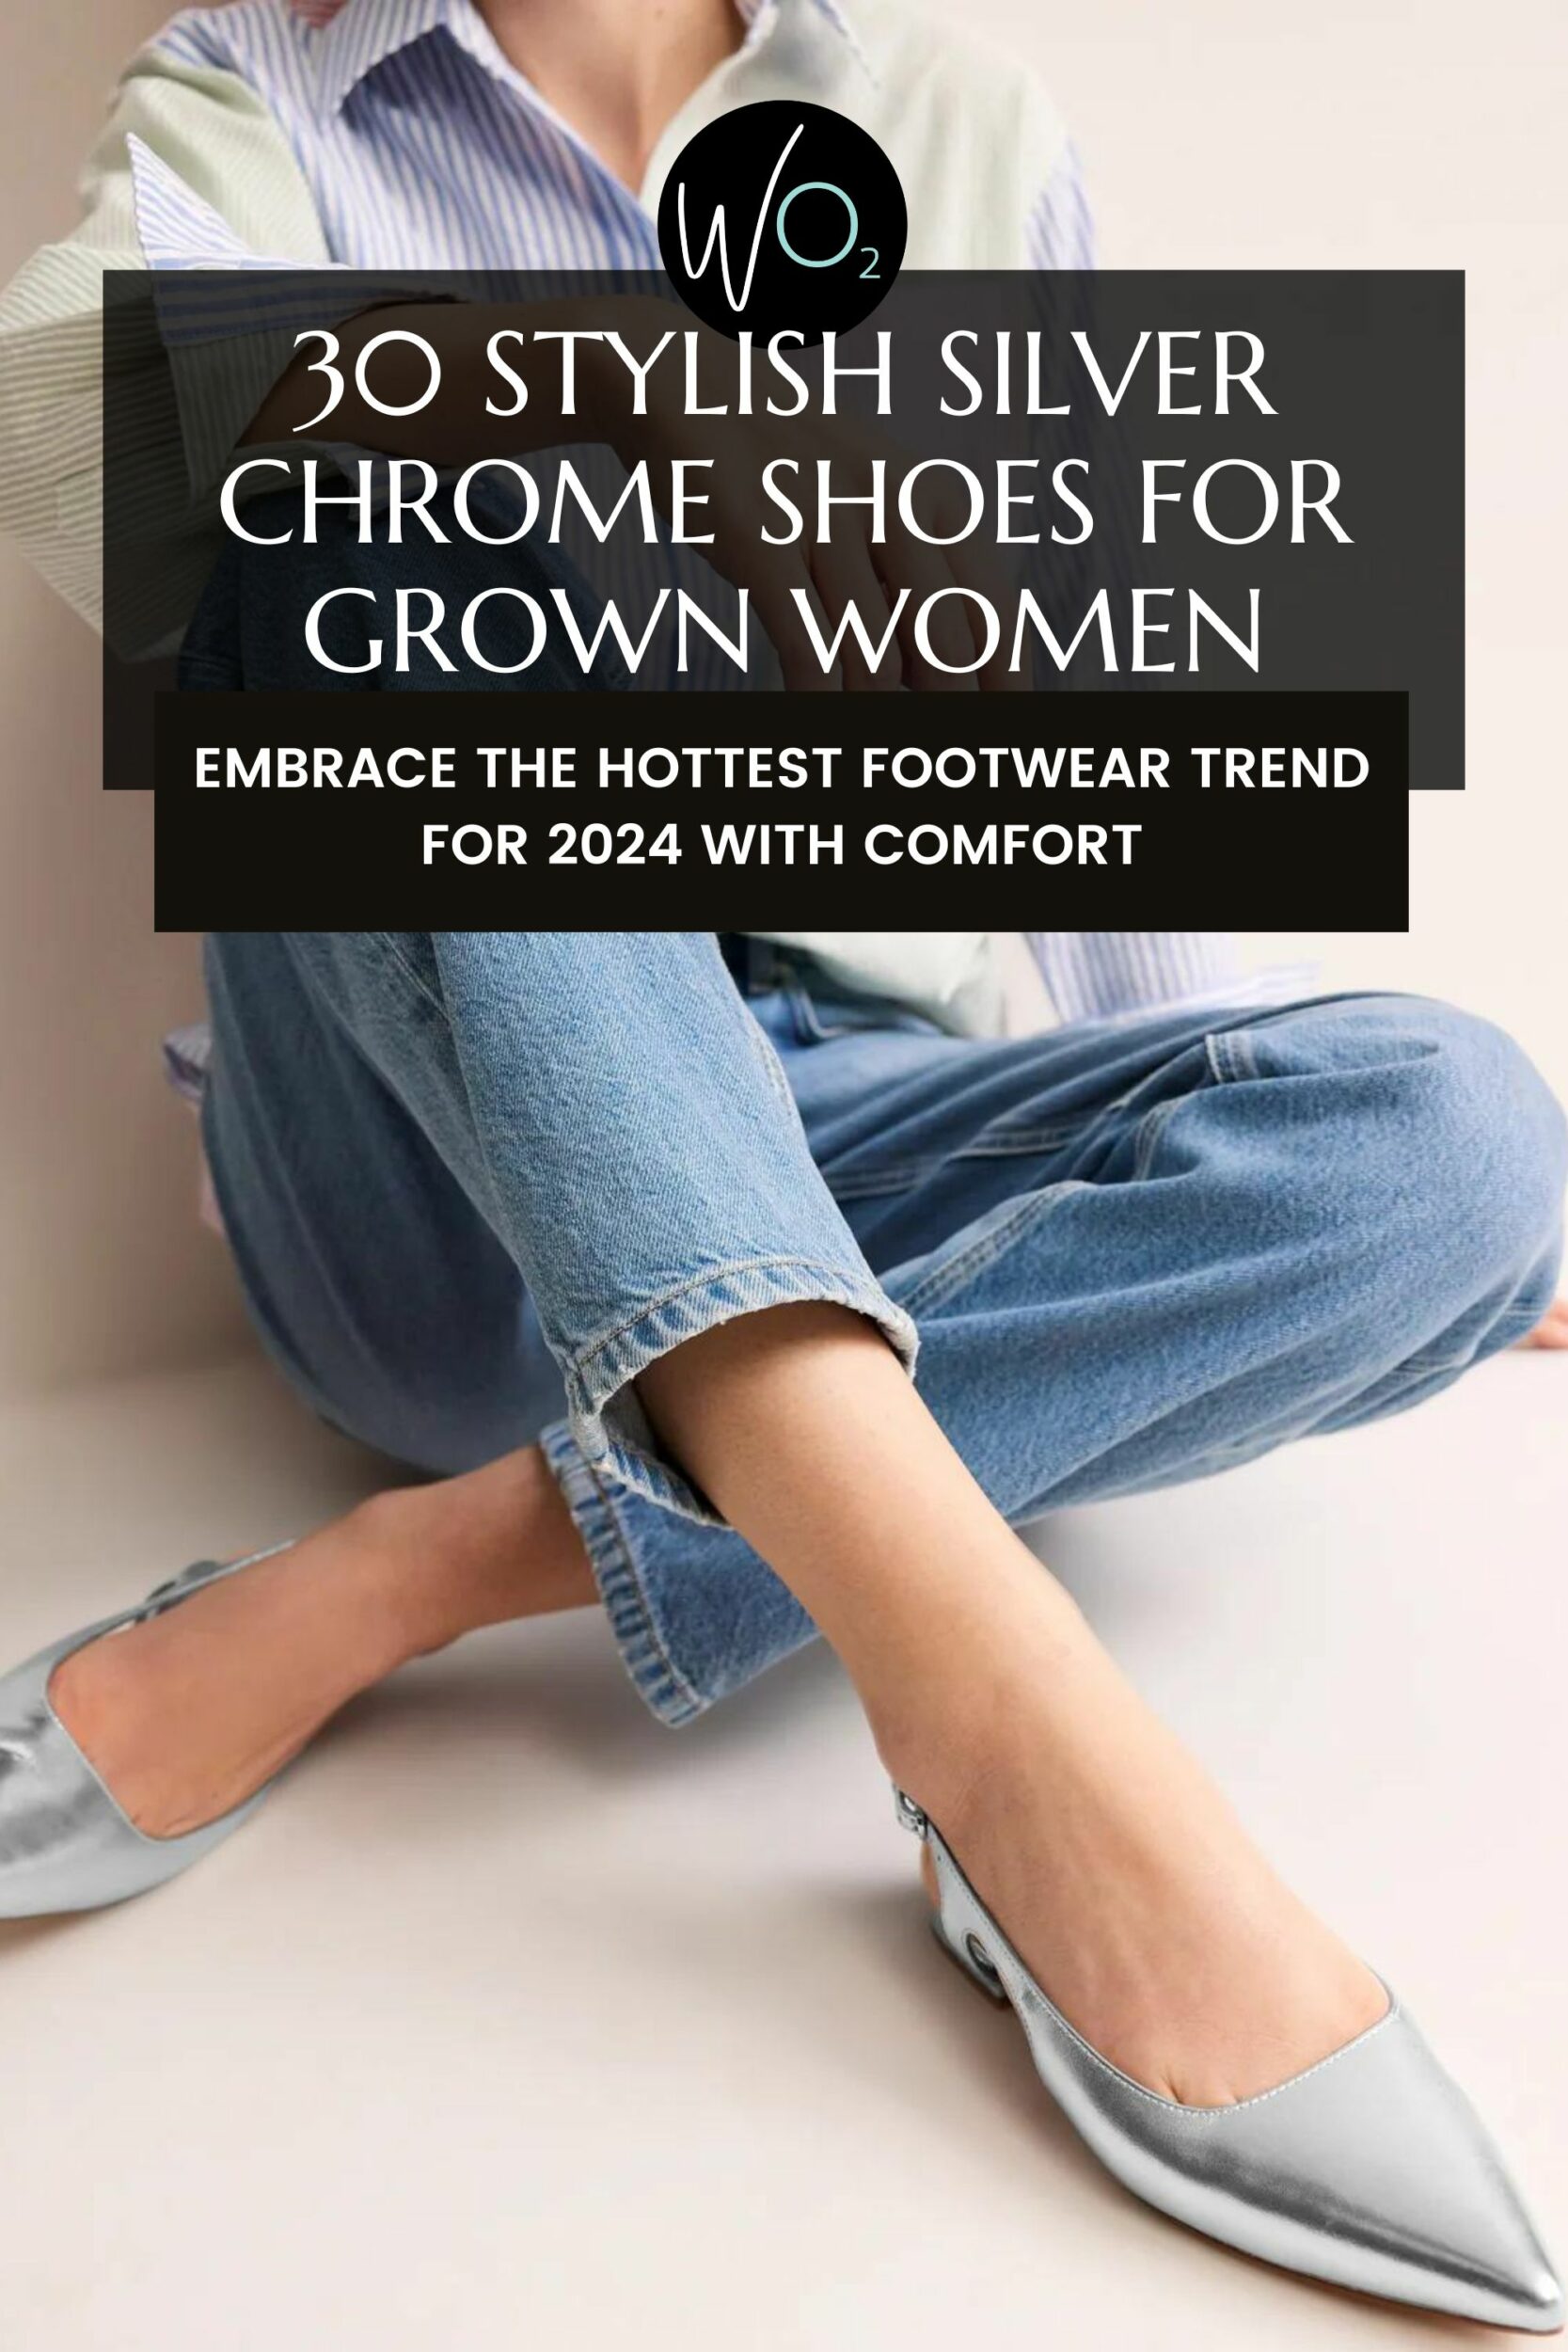 30 stylish silver chrome shoes for grown women featuring a silver pointed toe slingback flat from Boden